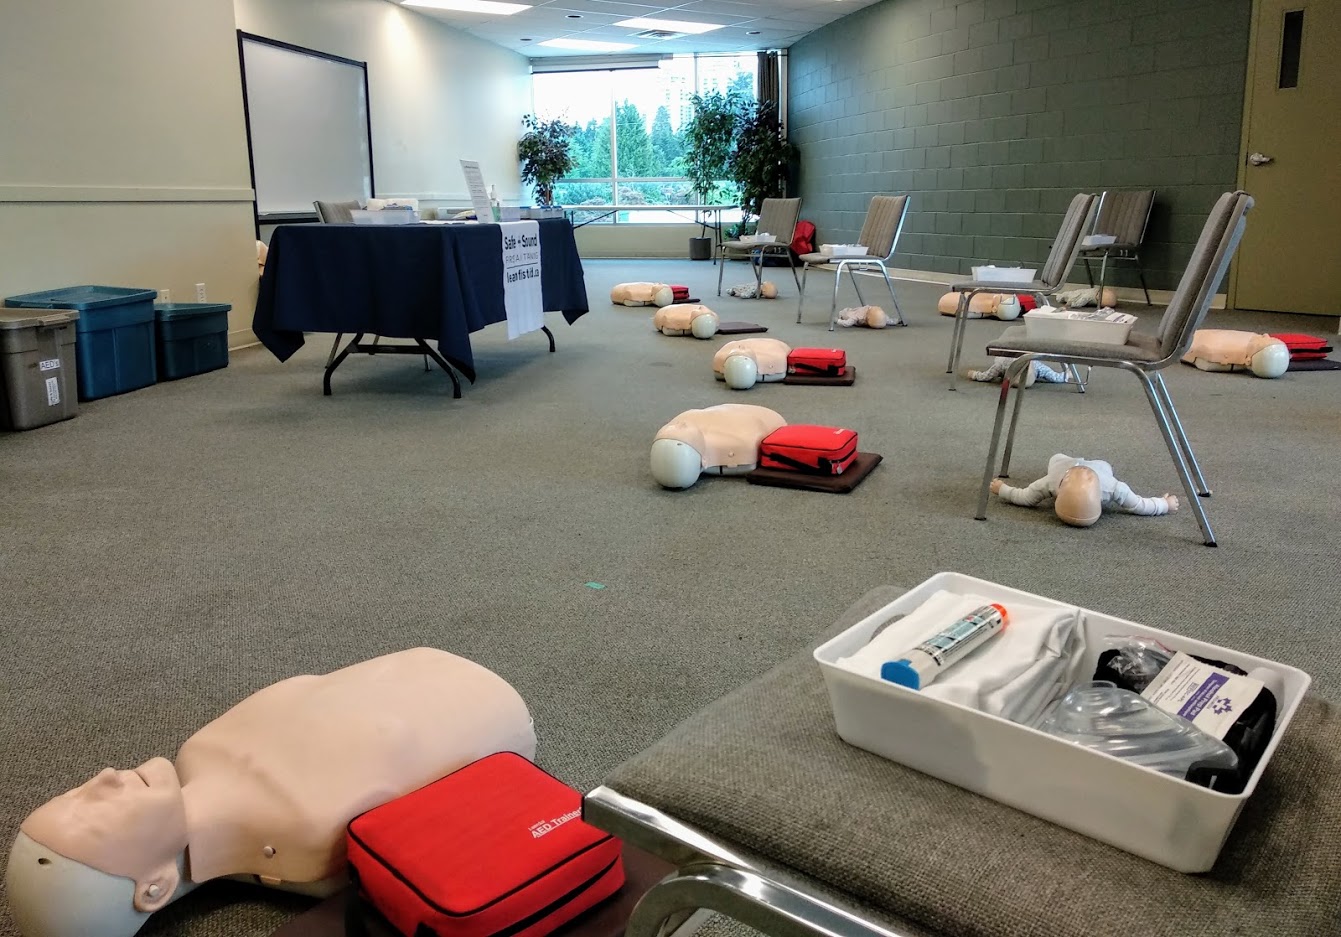 First aid training classroom with physical distancing layout